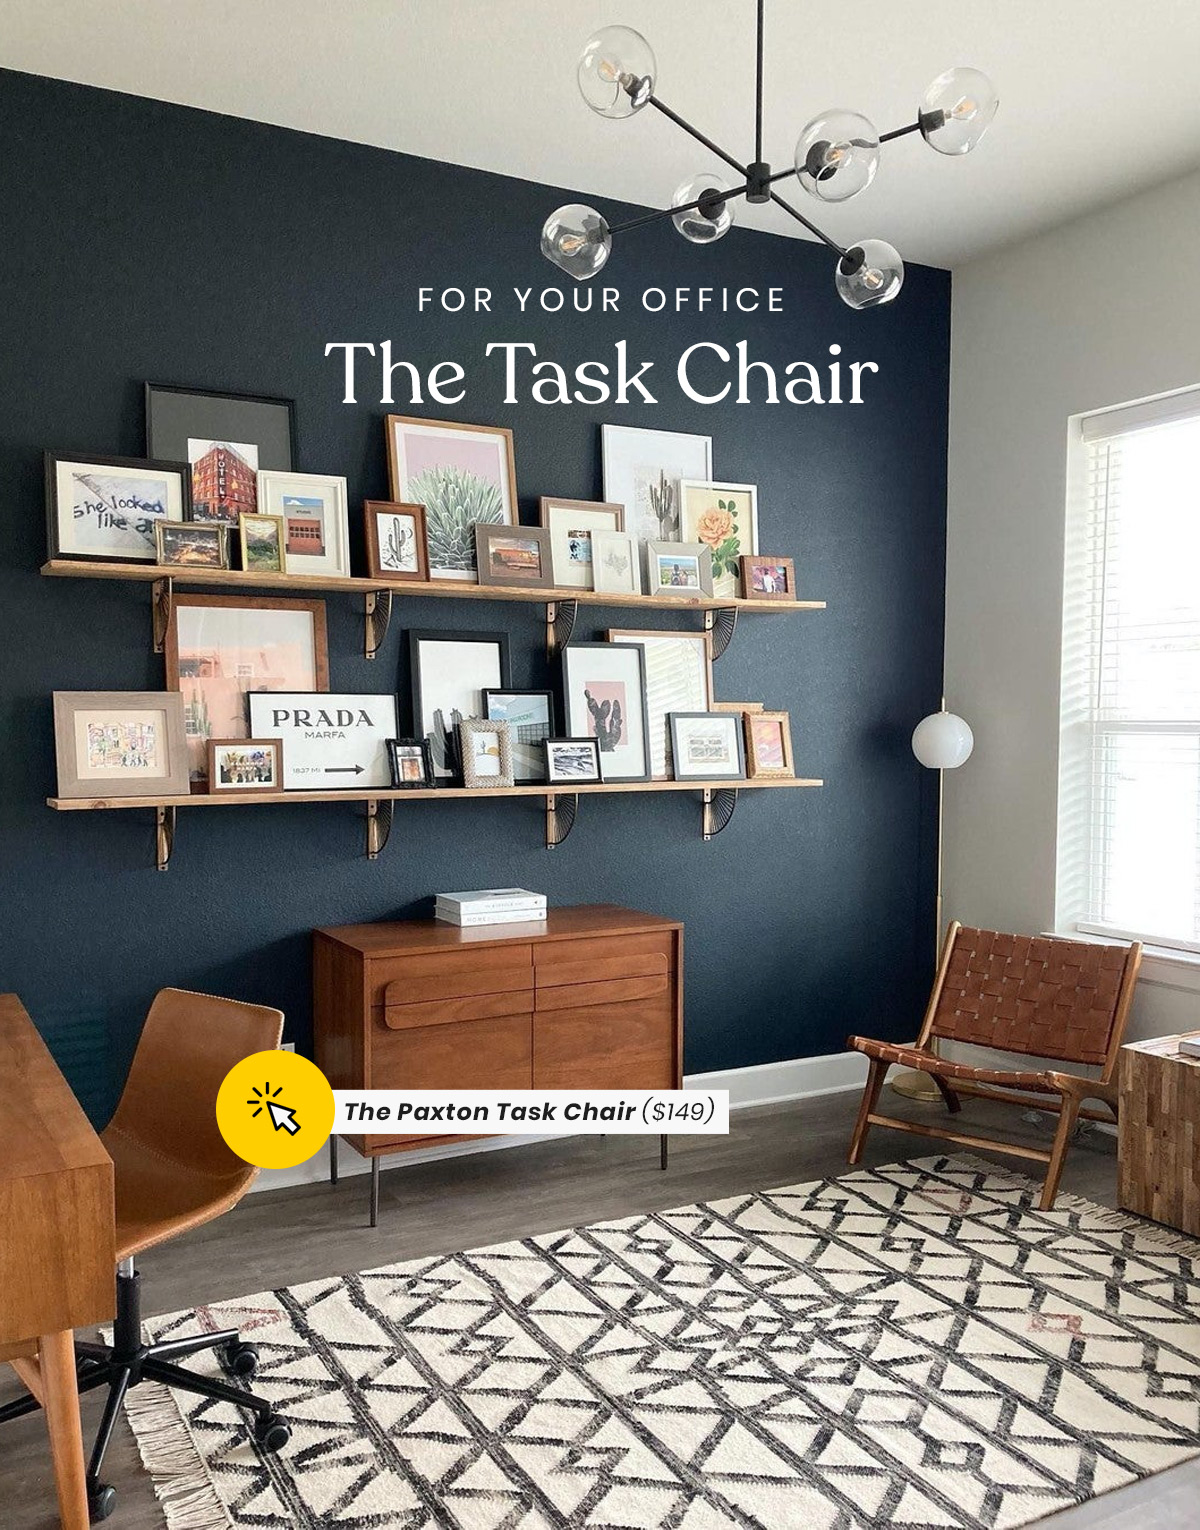 For Your Office | The Task Chair | the Paxton Task Chair ($149)